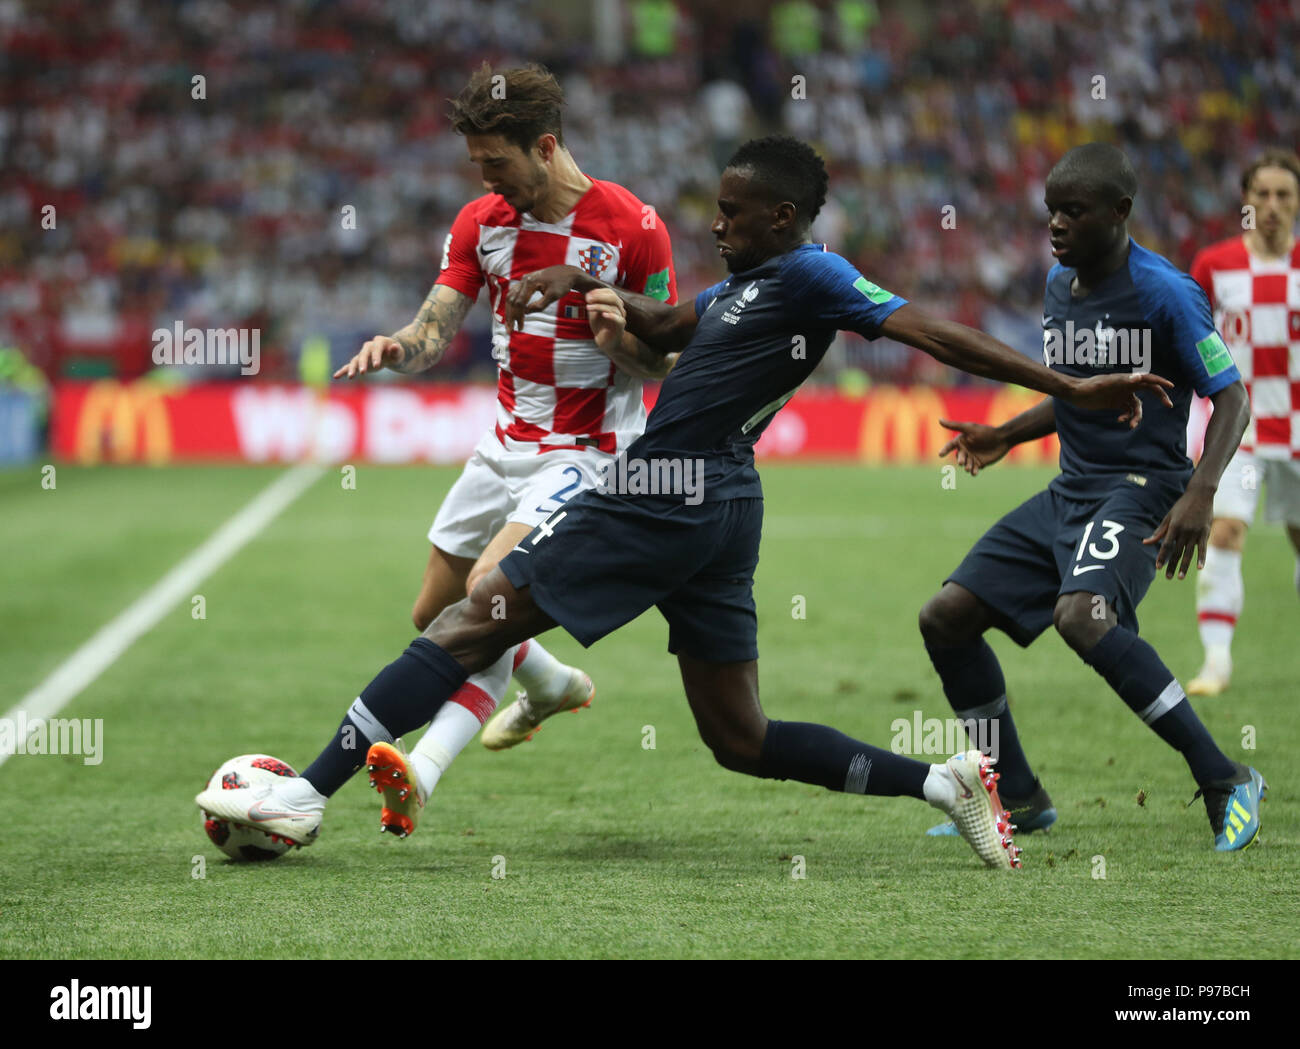 (180715) -- MOSCOW, July 15, 2018 (Xinhua) -- Blaise Matuidi (C) of France vies with Sime Vrsaljko (L) of Croatia during the 2018 FIFA World Cup final match between France and Croatia in Moscow, Russia, July 15, 2018. (Xinhua/Fei Maohua) Stock Photo